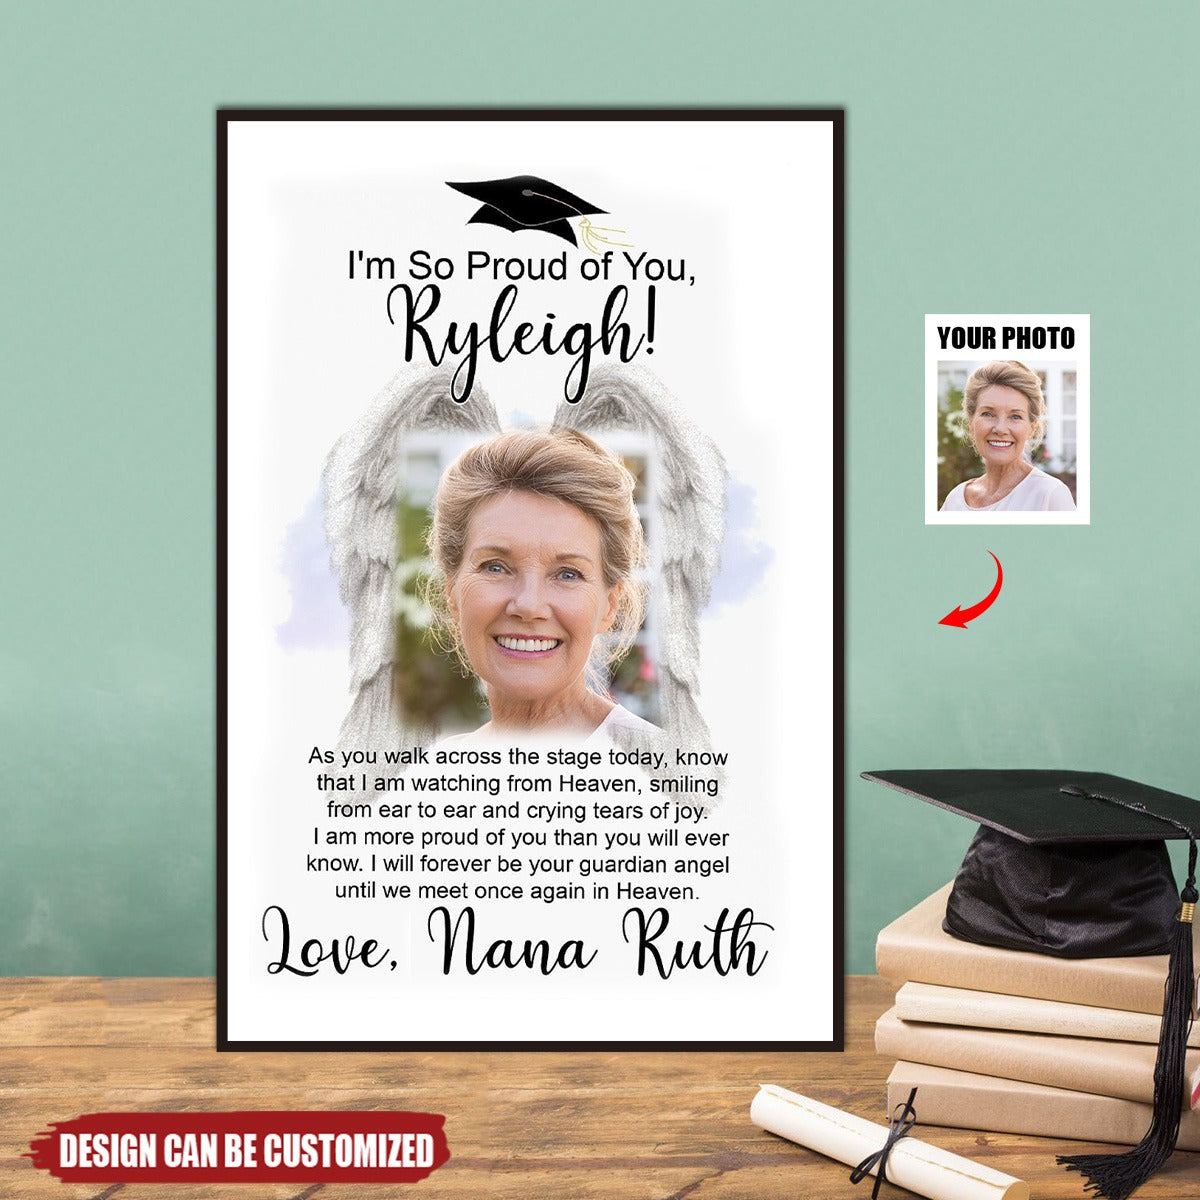 Personalized Memorial Graduation Canvas - I'm So Proud of You